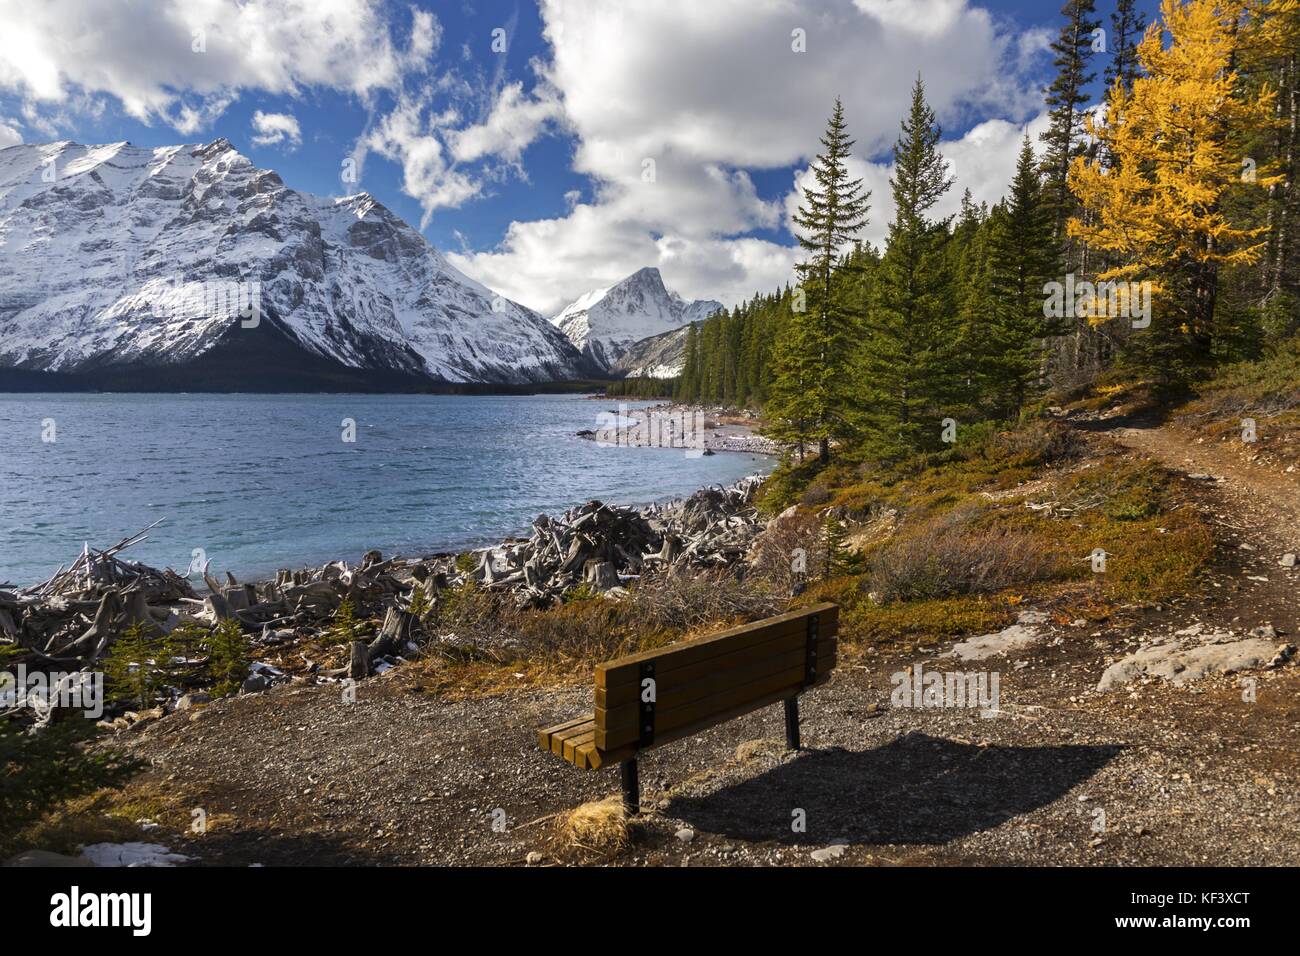 Park Picnic Bench and Upper Kananaskis Lake Landscape View on Great Hiking Trail near Banff National Park in Rocky Mountains Alberta Canada Stock Photo